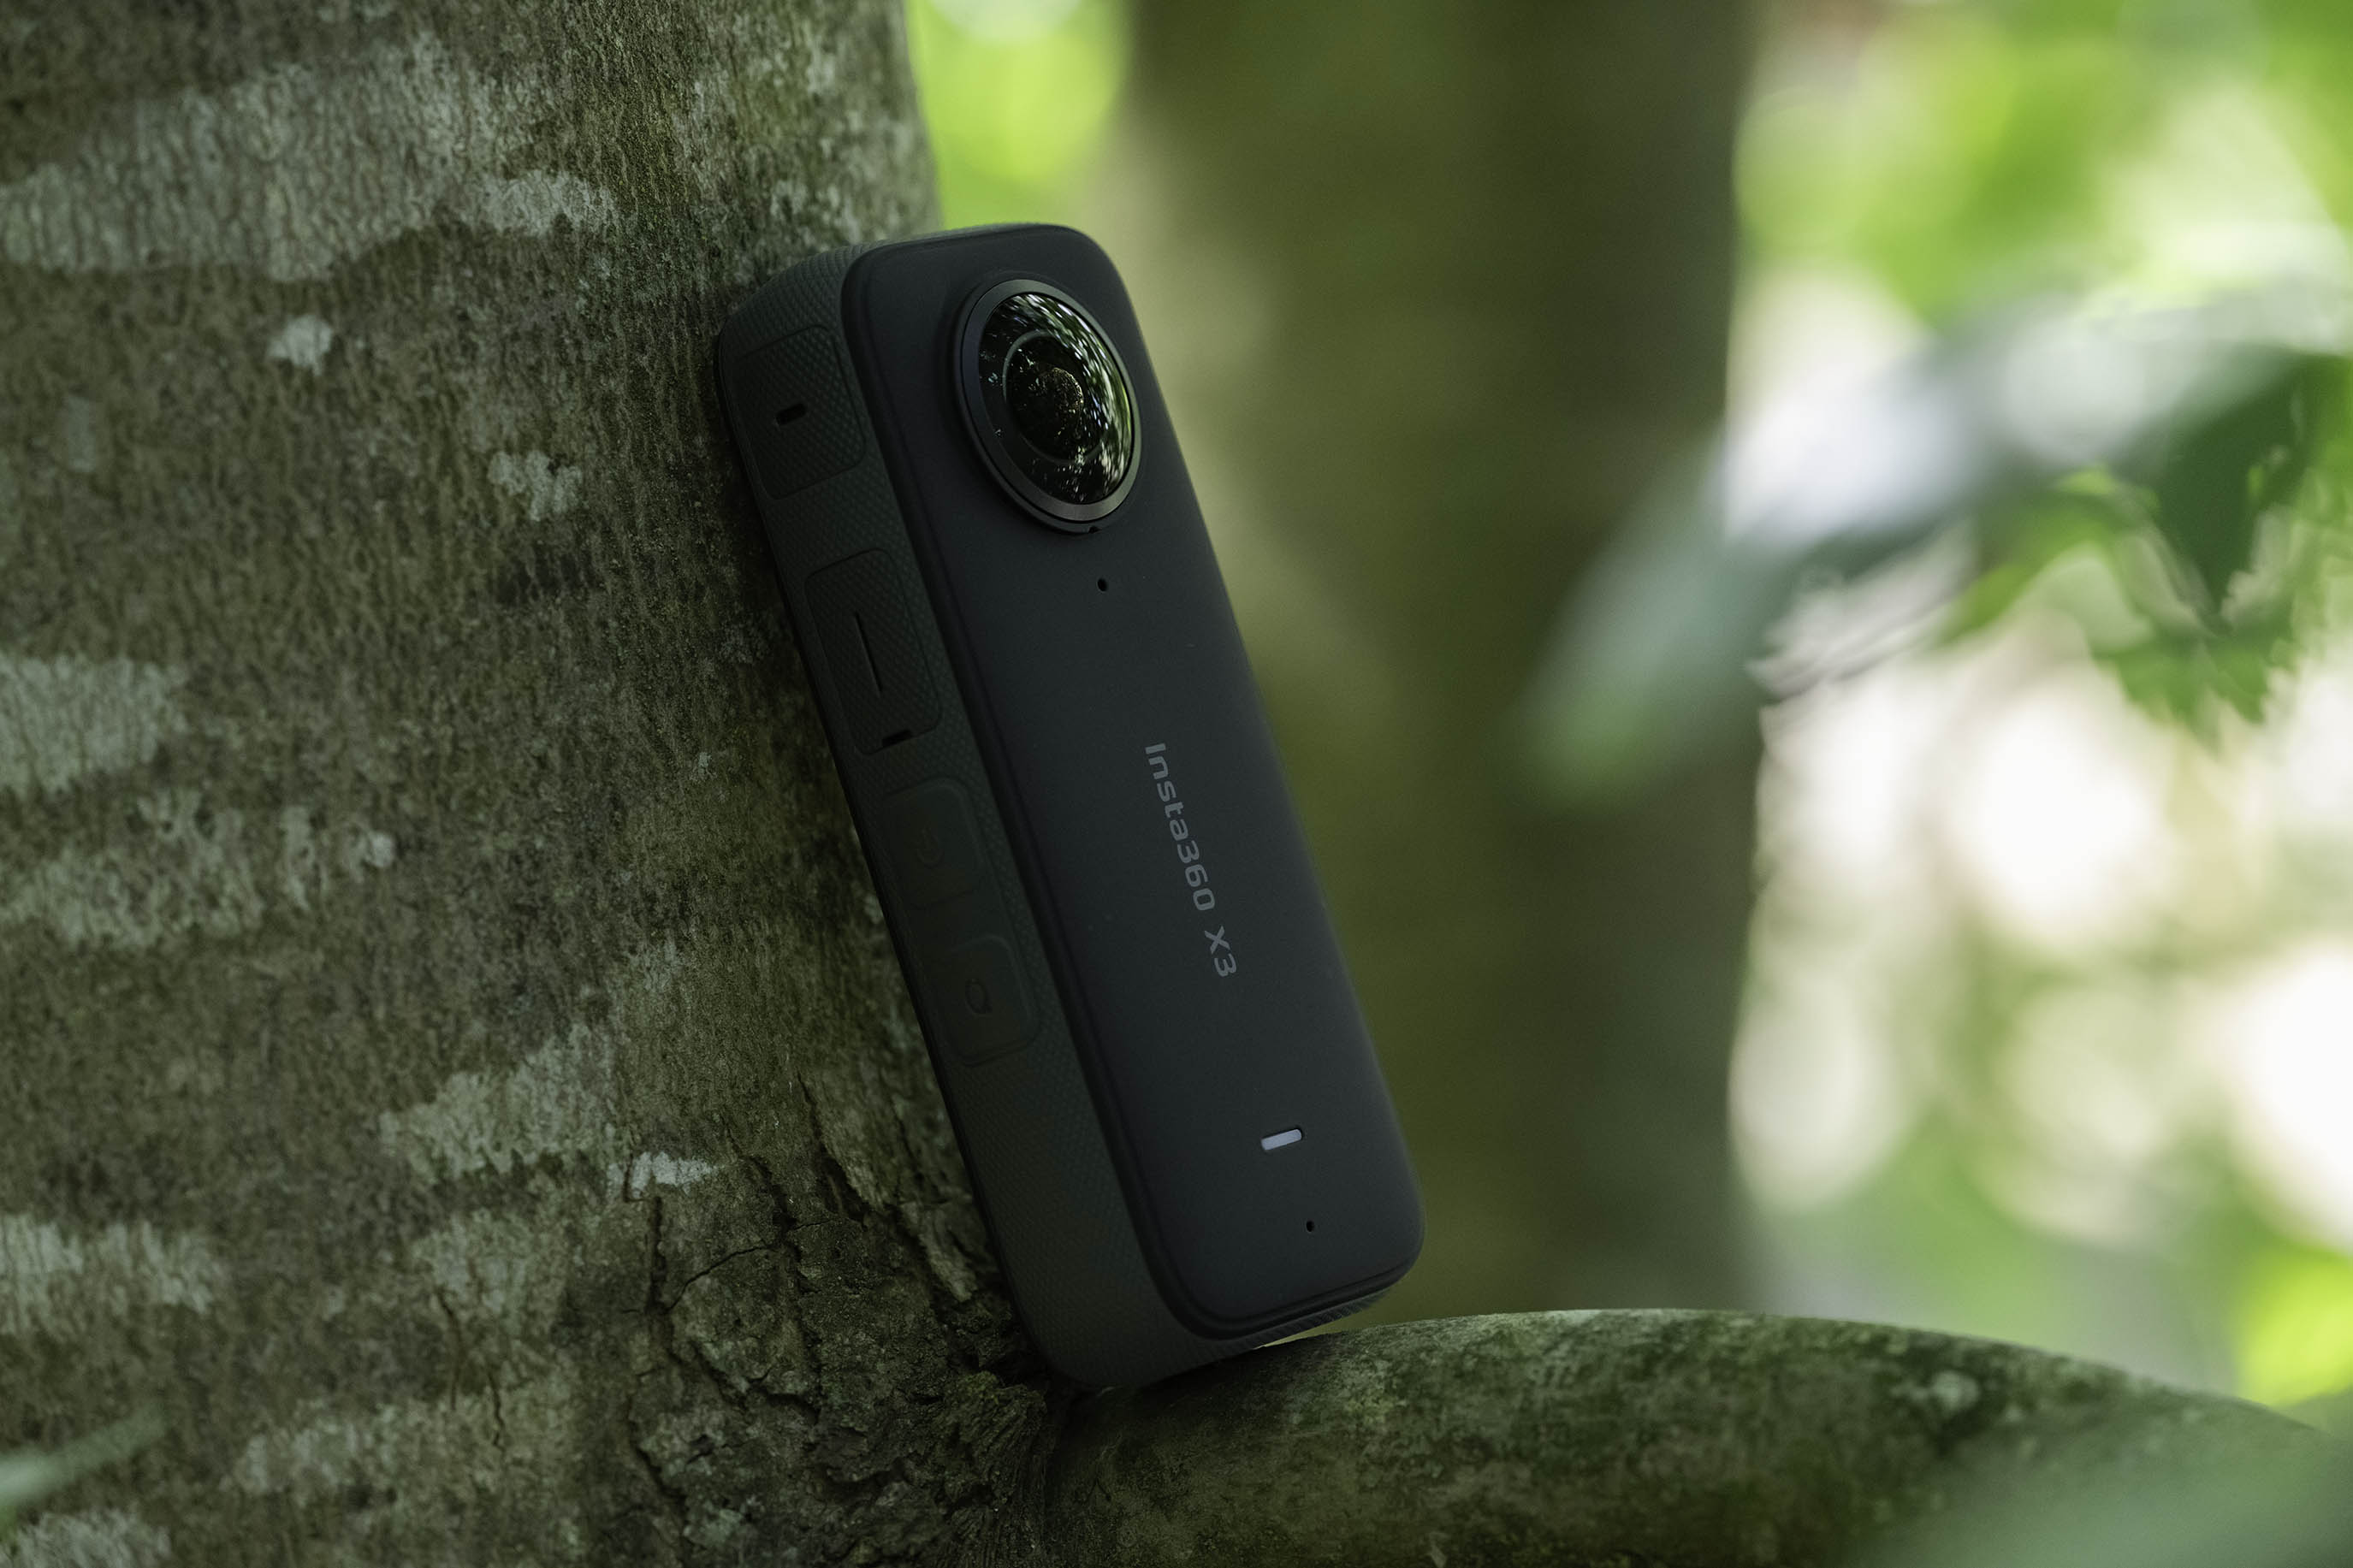 Insta360 X3 Review: the best waterproof 360 camera